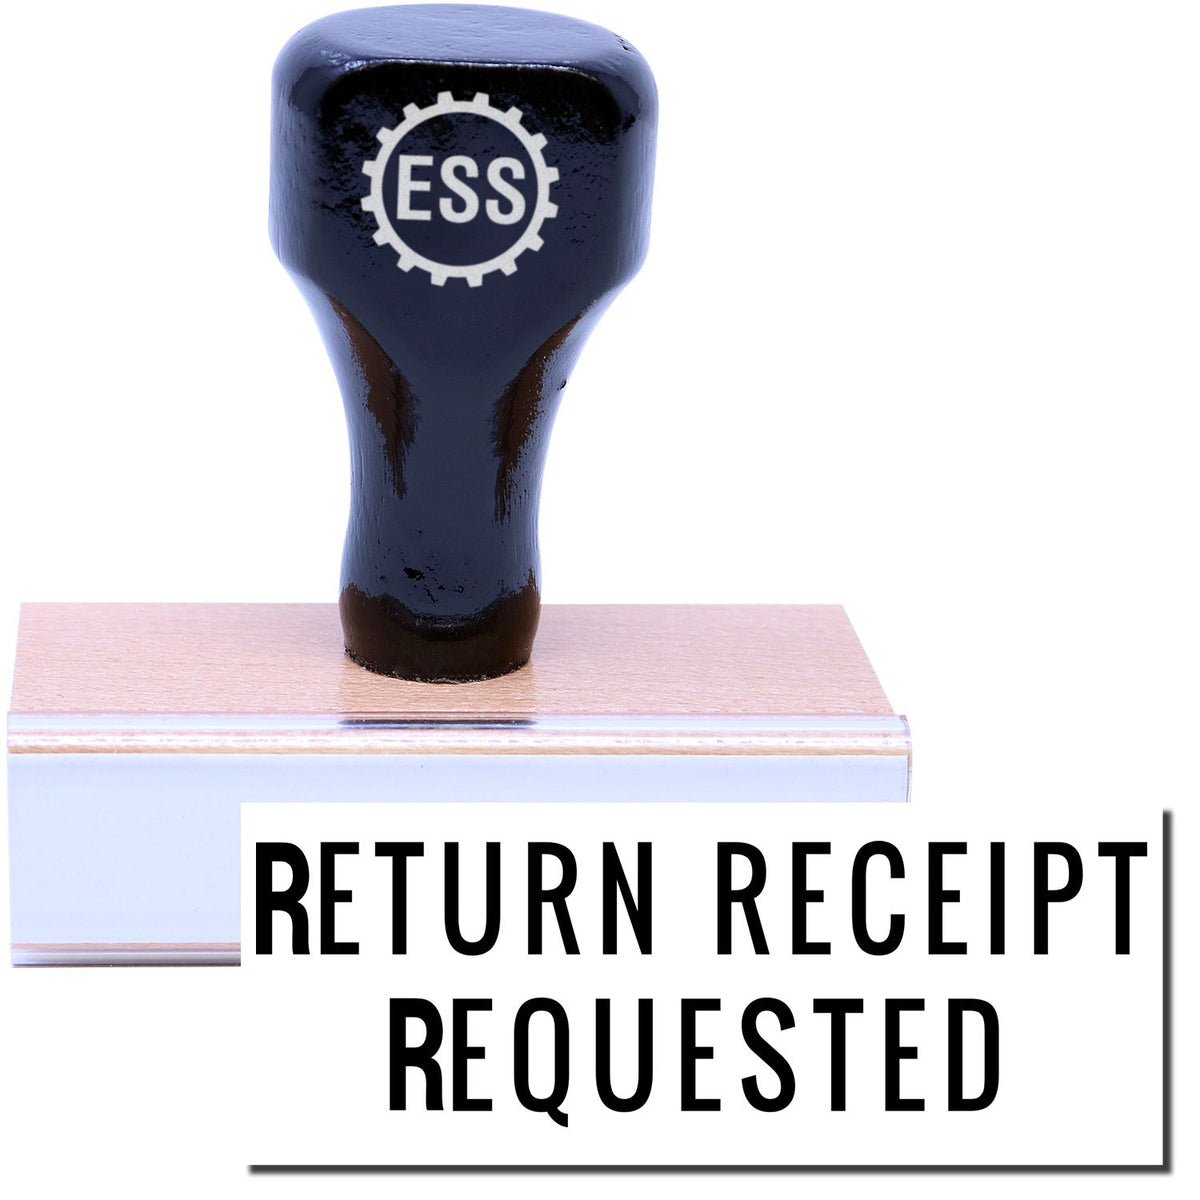 A stock office rubber stamp with a stamped image showing how the text &quot;RETURN RECEIPT REQUESTED&quot; in a narrow font is displayed after stamping.